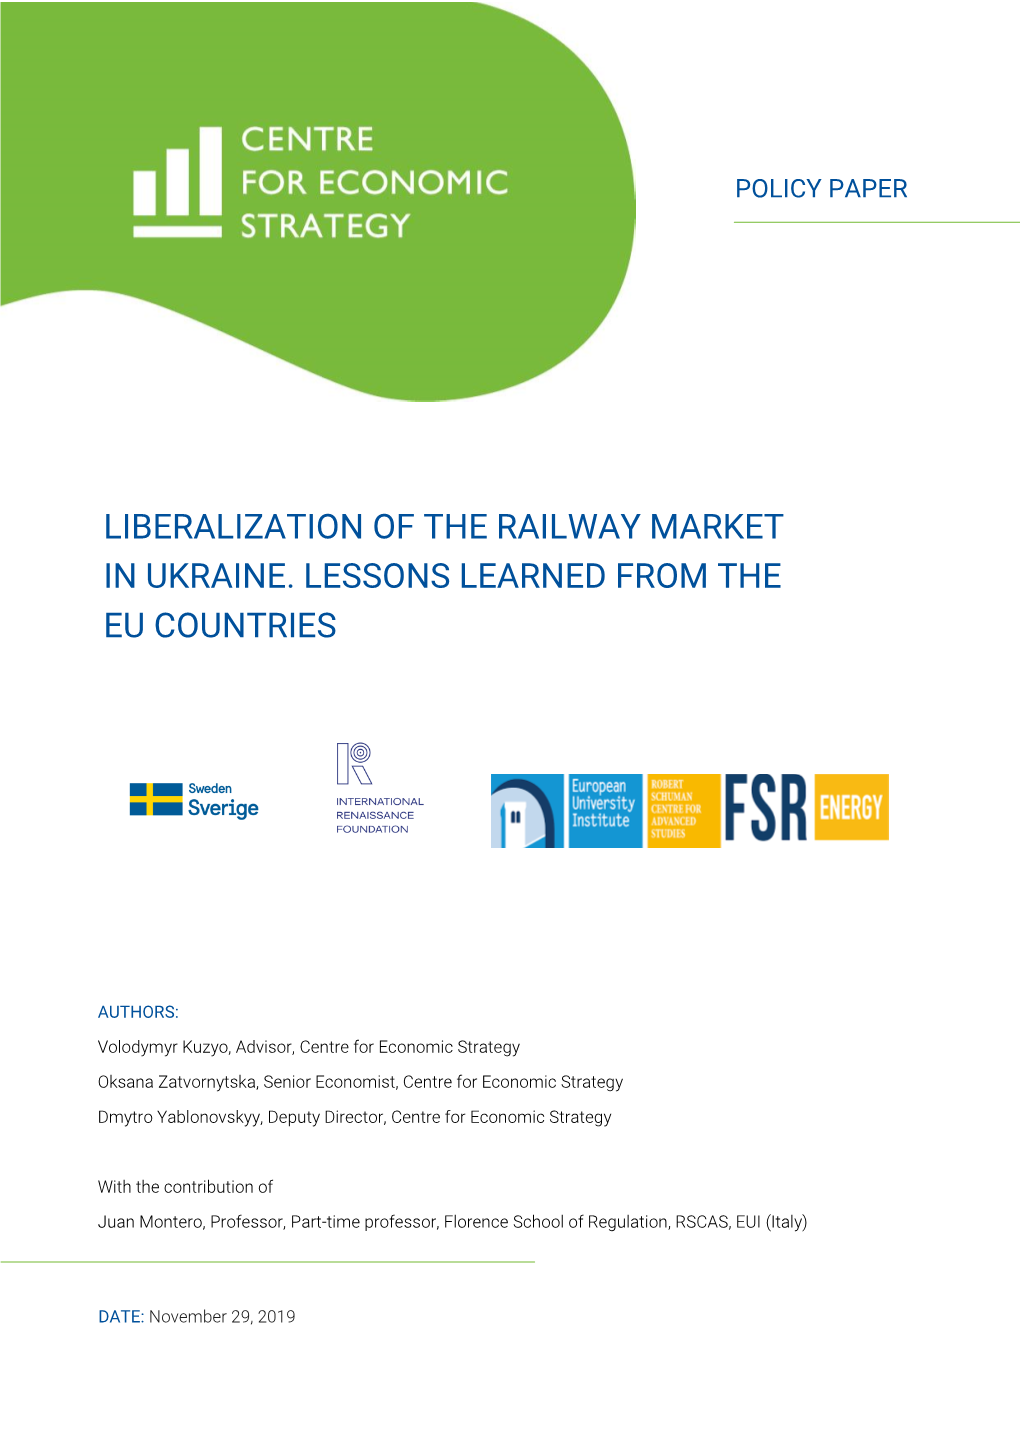 Liberalization of the Railway Market in Ukraine. Lessons Learned from the Eu Countries